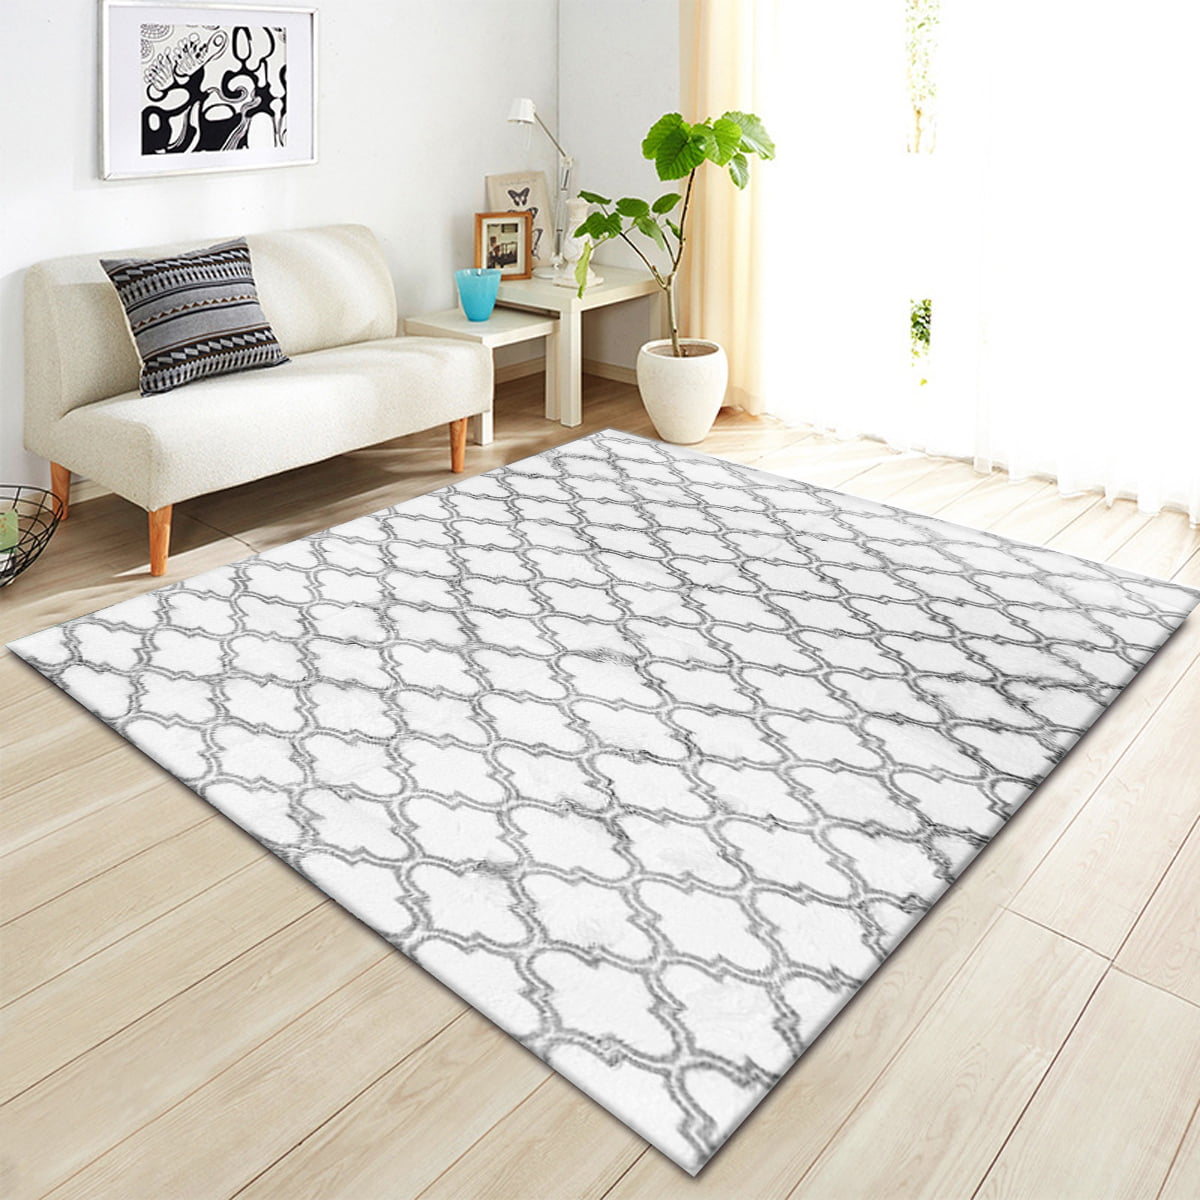 Large Size Soft Bedroom Rugs 9.8' x 6.6' Shaggy Floor